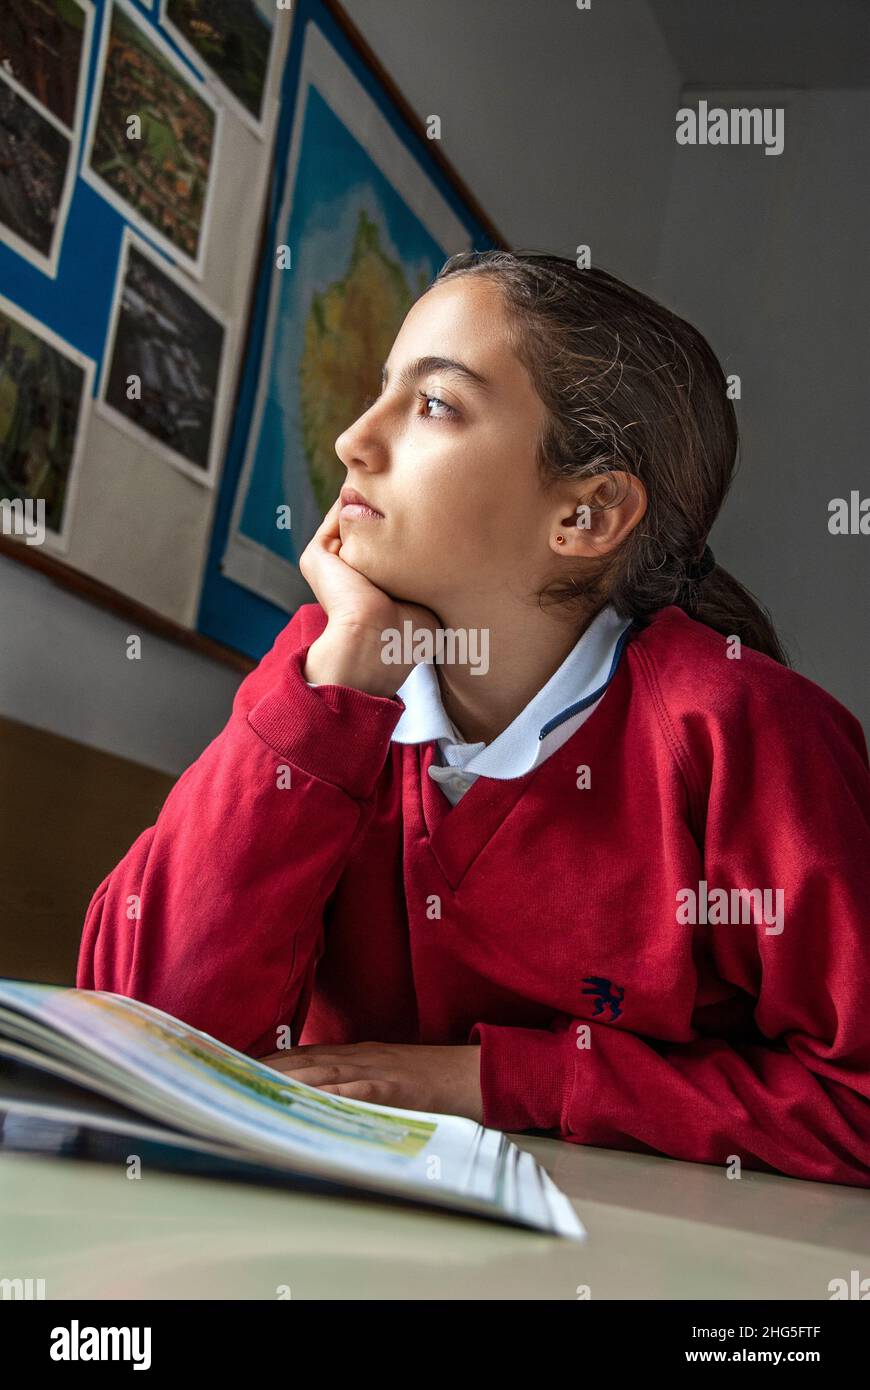 SCHOOL PUPIL GIRL DAYDREAMING PENSIVE CLASS ASIAN HISPANIC GIRL 12-14 years Junior girl student gazes out of school classroom window, dreaming. Stock Photo